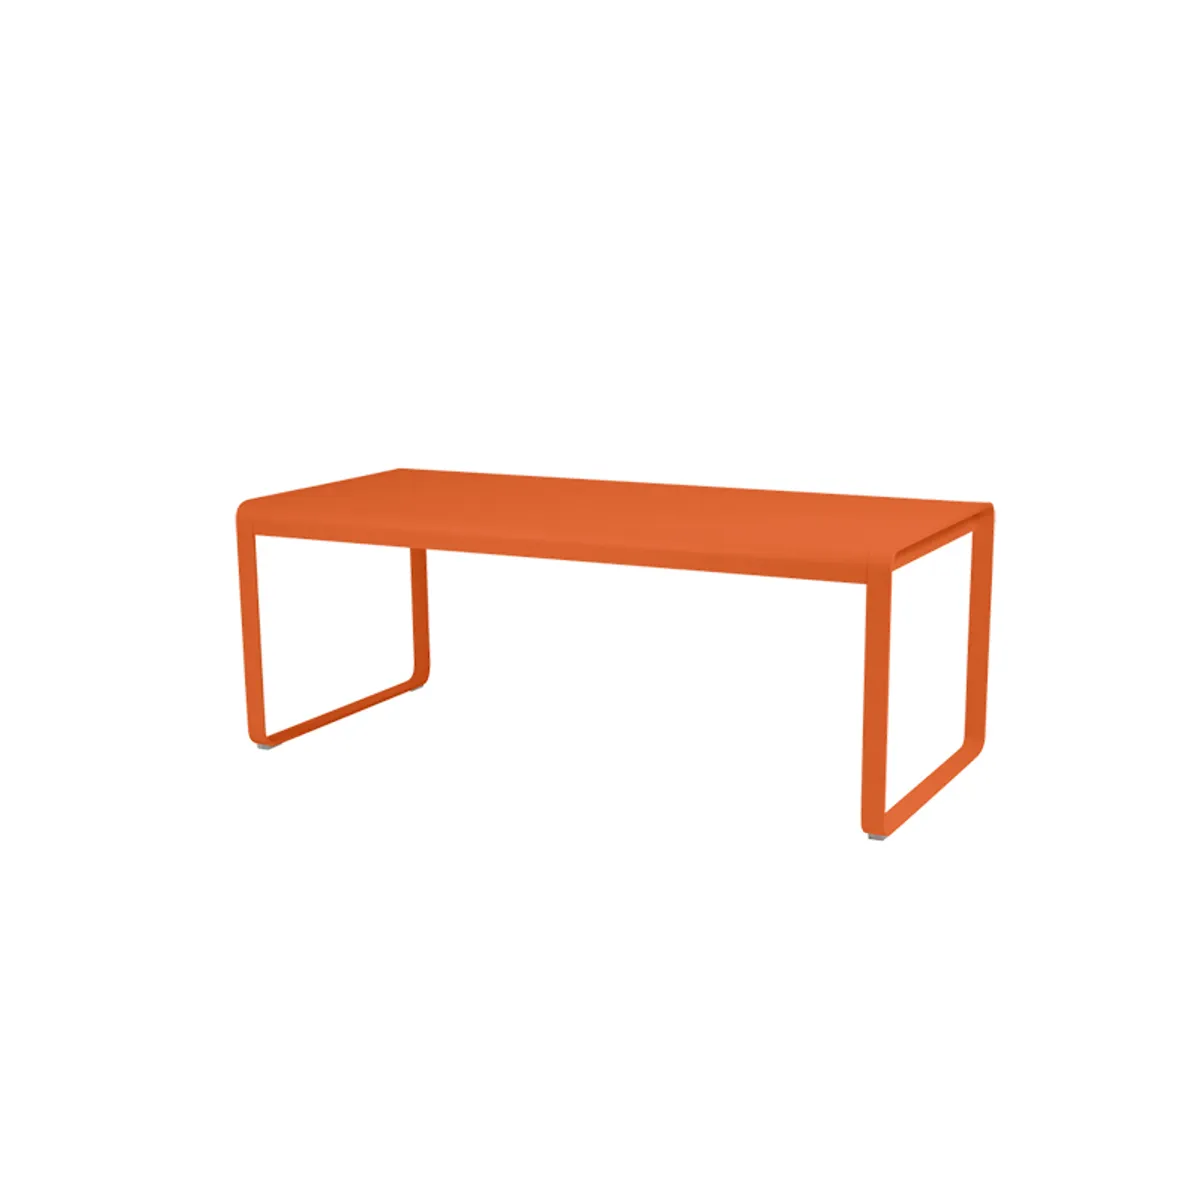 Bellevie Outdoor And Indoor Table Furniture For Cafes And Restaurants Orange